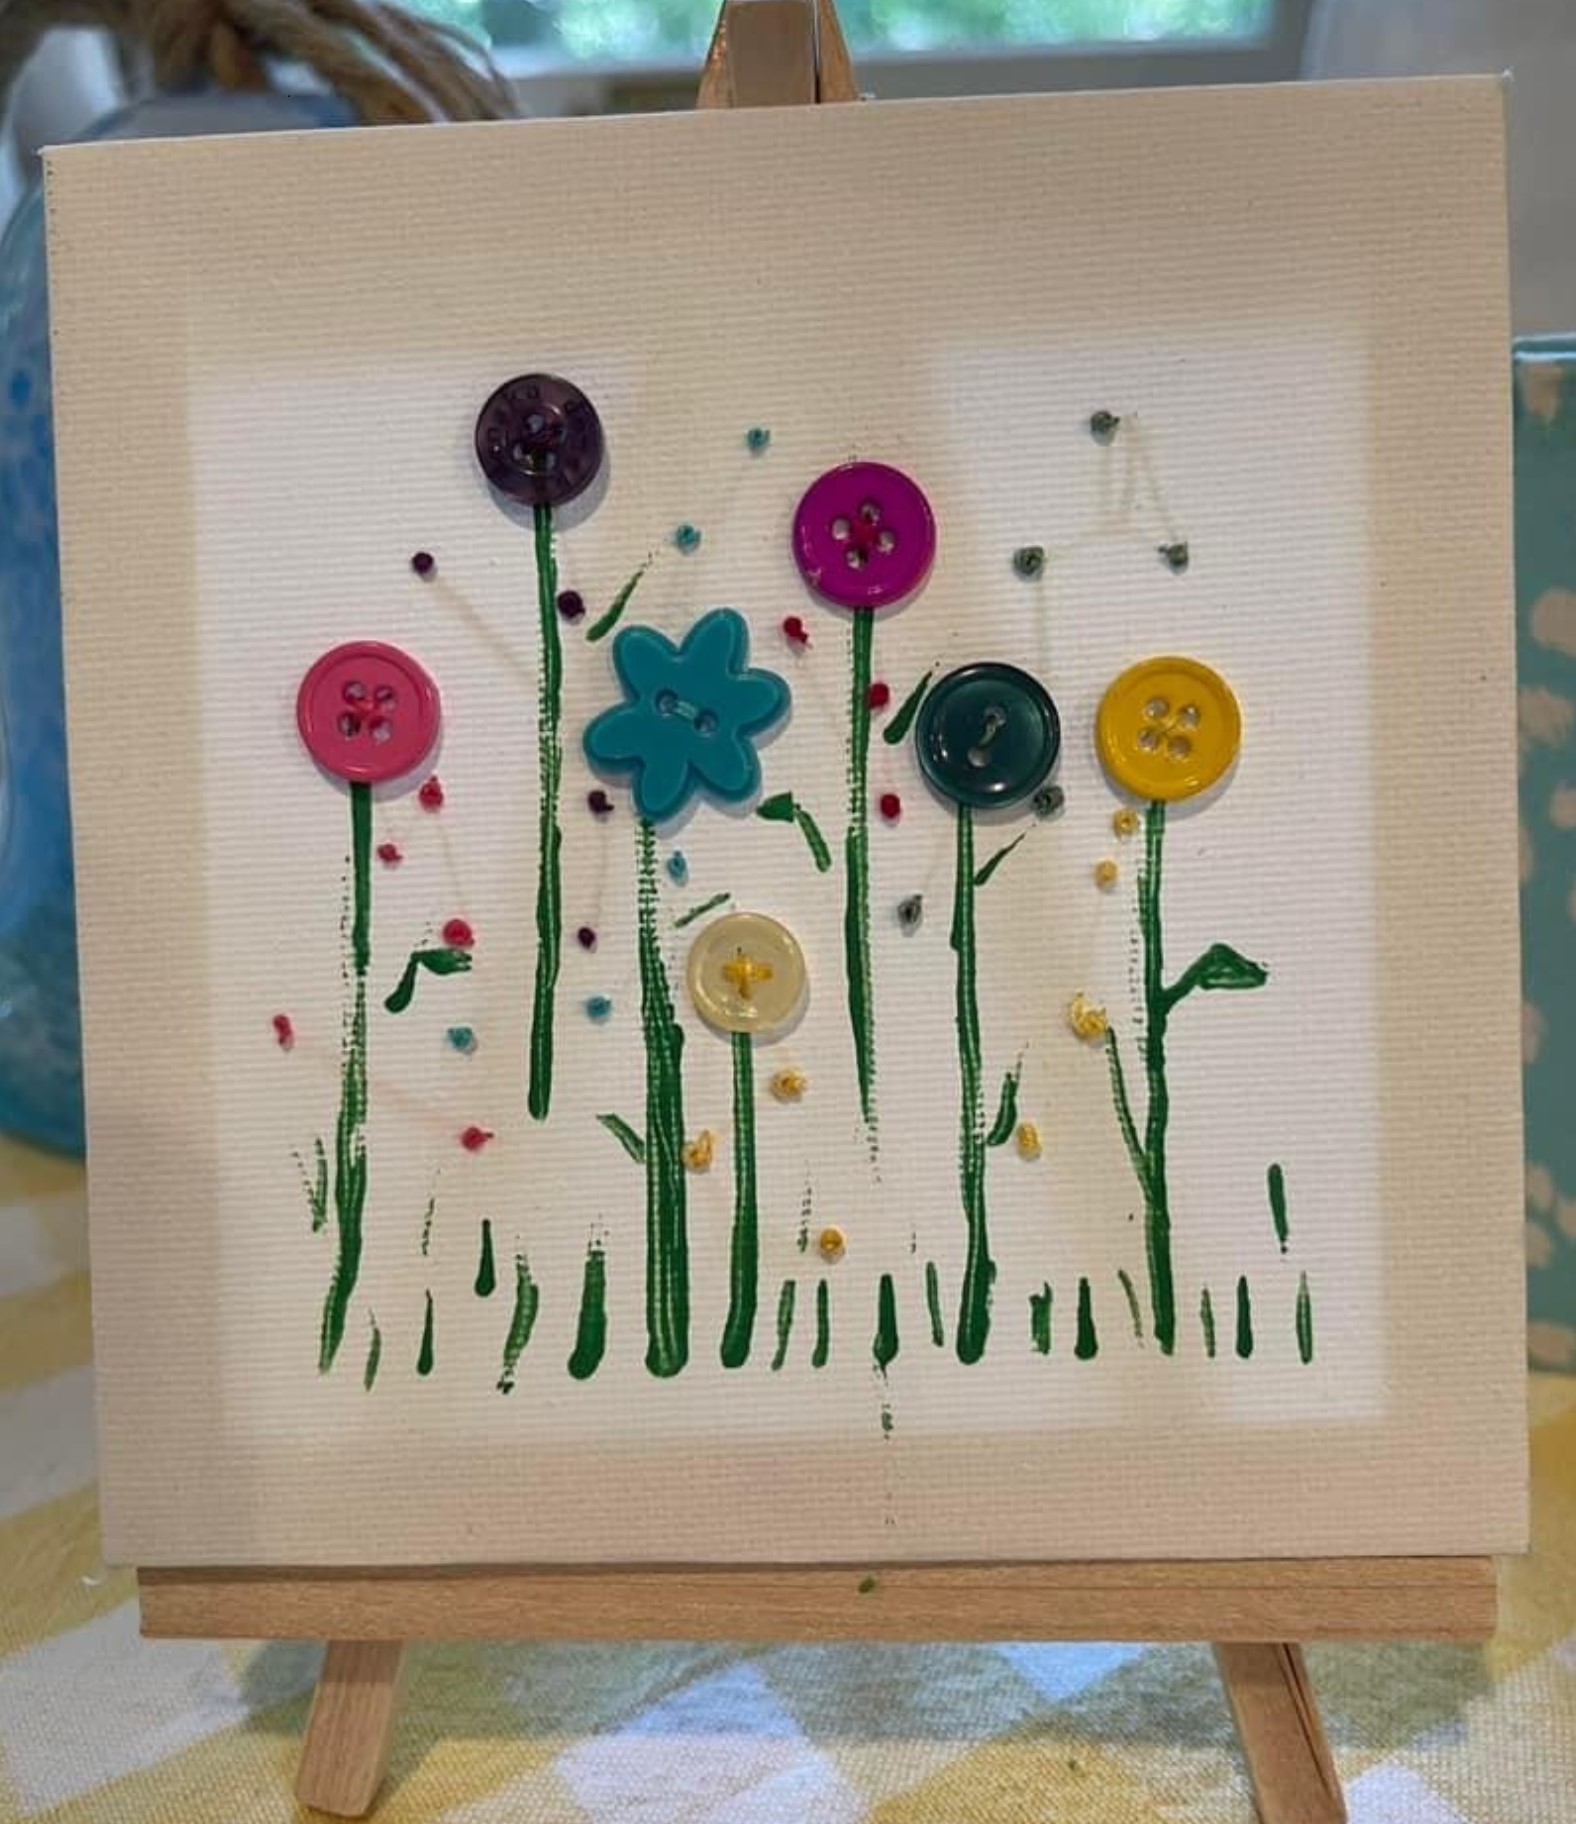 canvas displayed on an easel with colorful flowers made using buttons